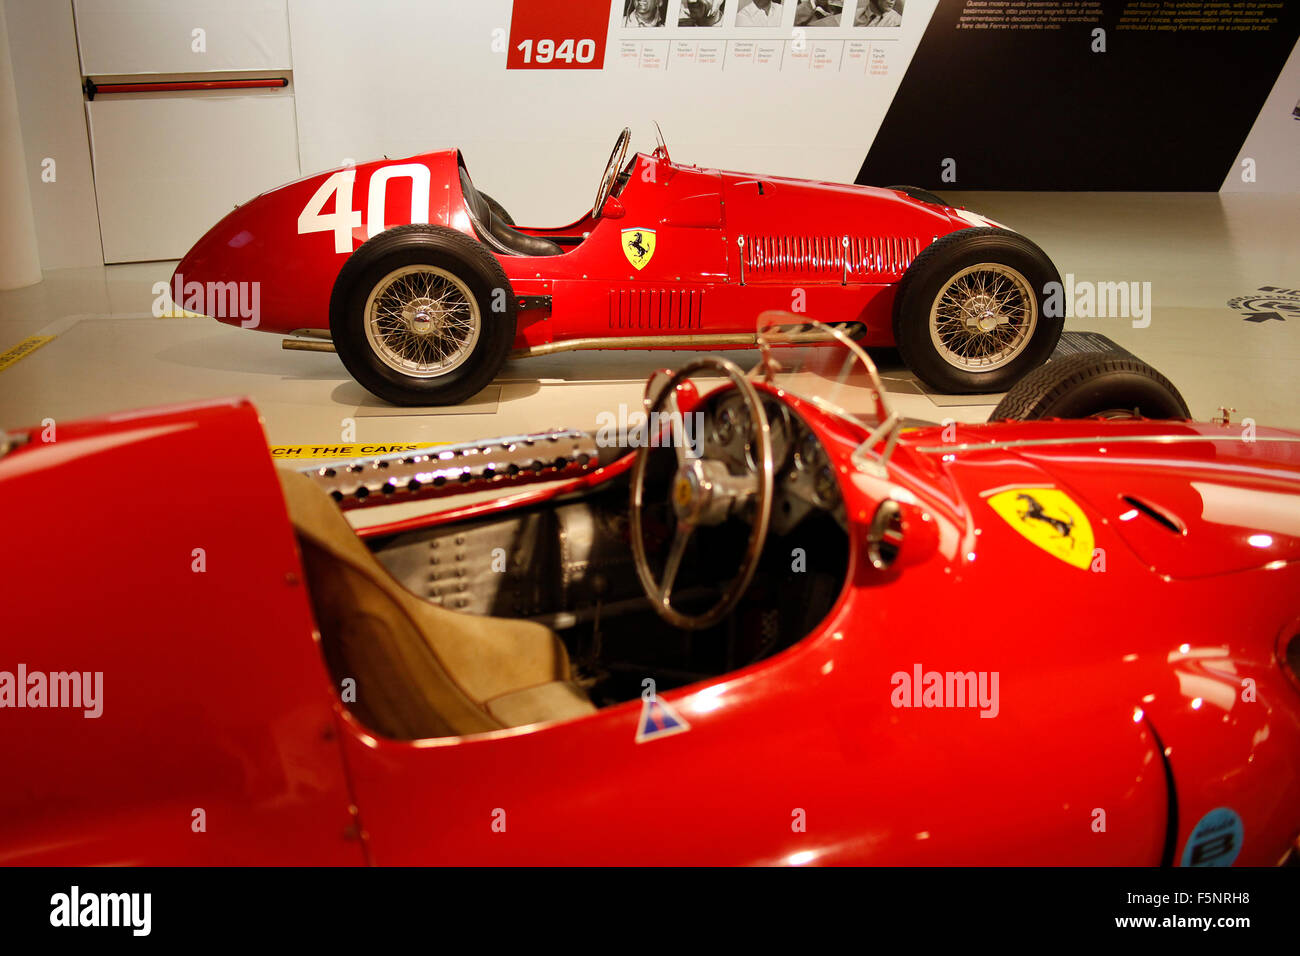 1955 555 F1 (foreground) and 1948 166 F2 at the Museo Ferrari in Maranello, Italy. Stock Photo